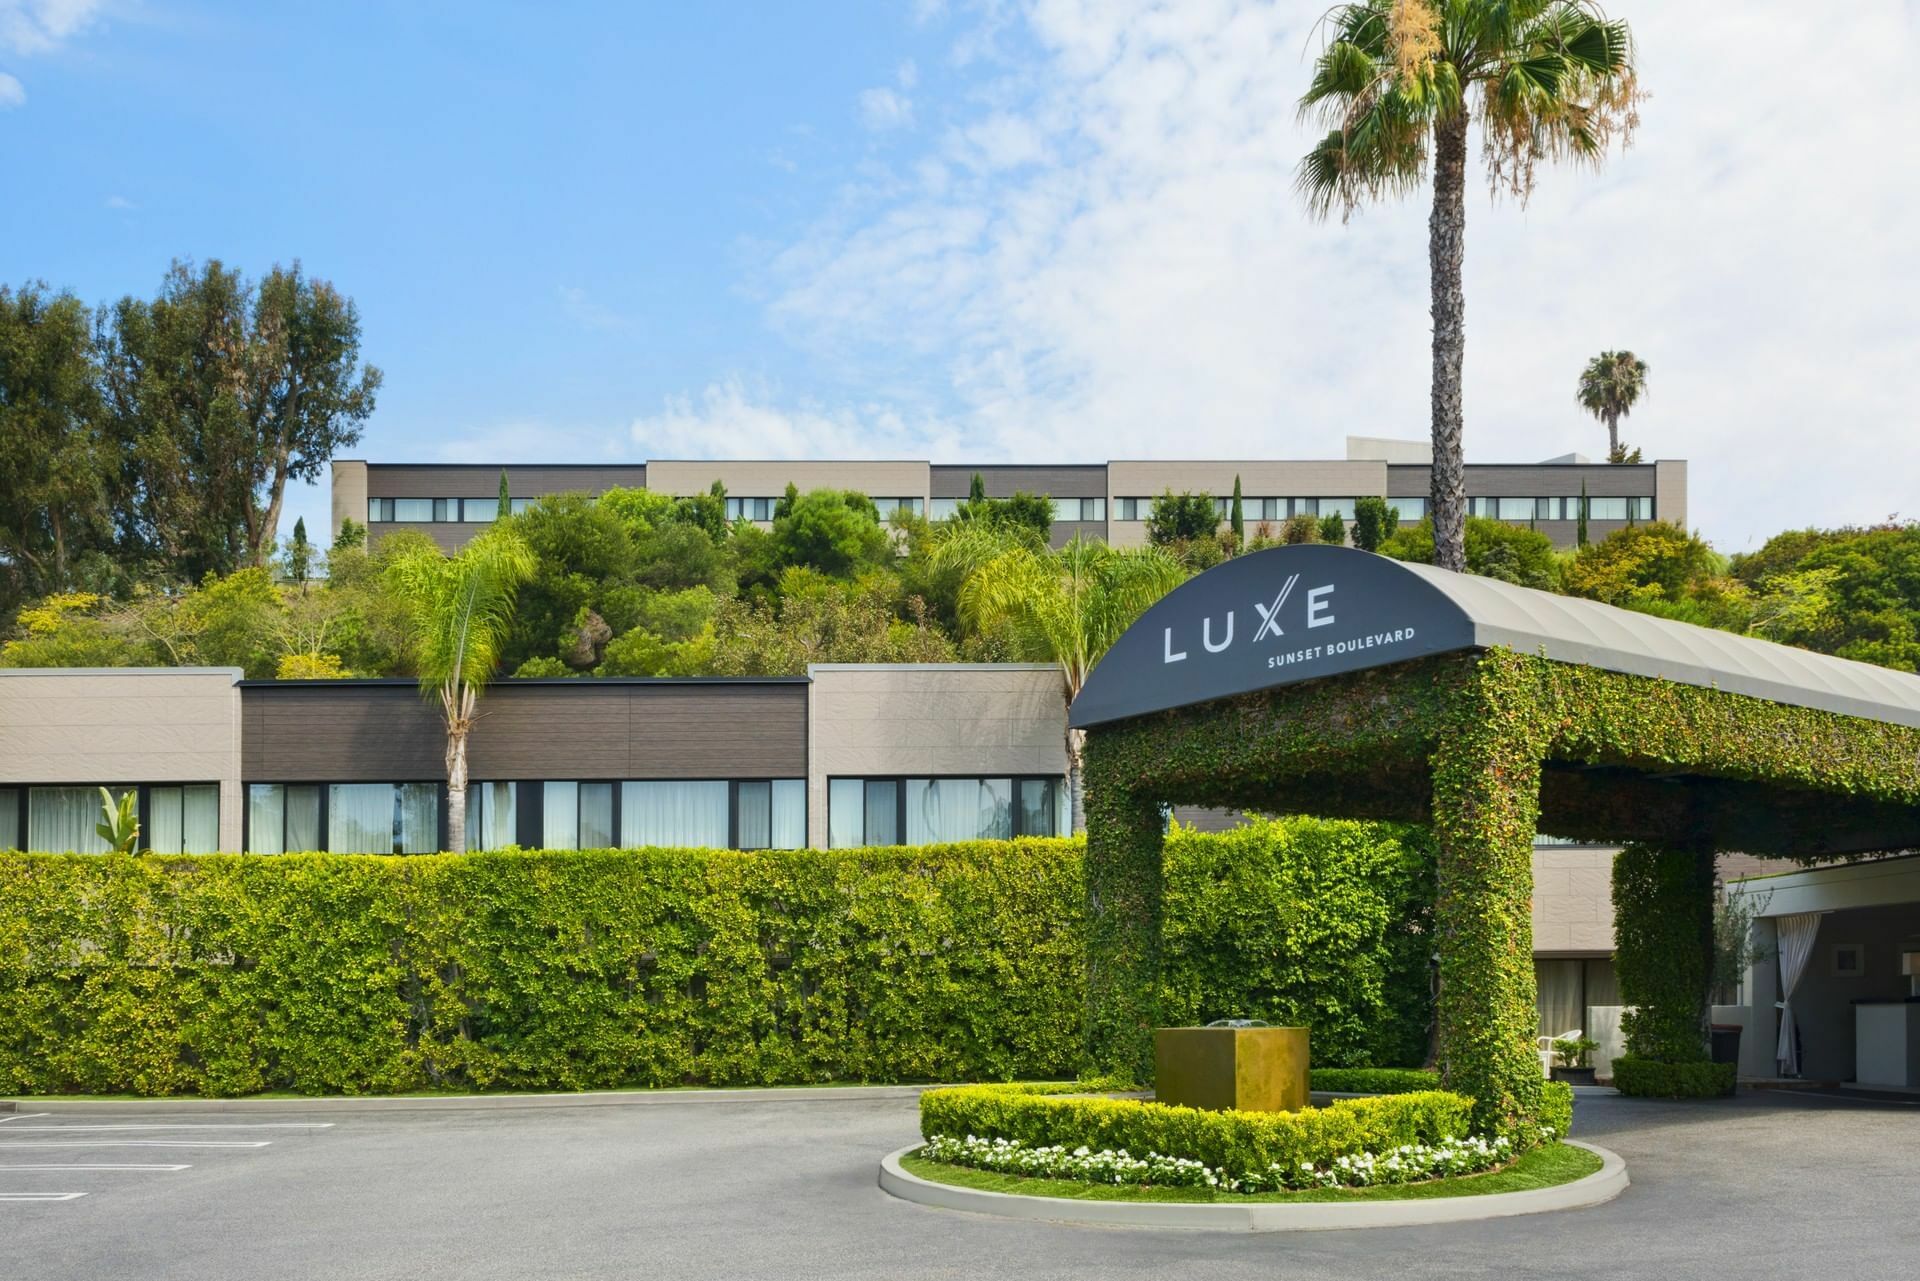 Photo of Luxe Sunset Boulevard Hotel, Los Angeles, CA